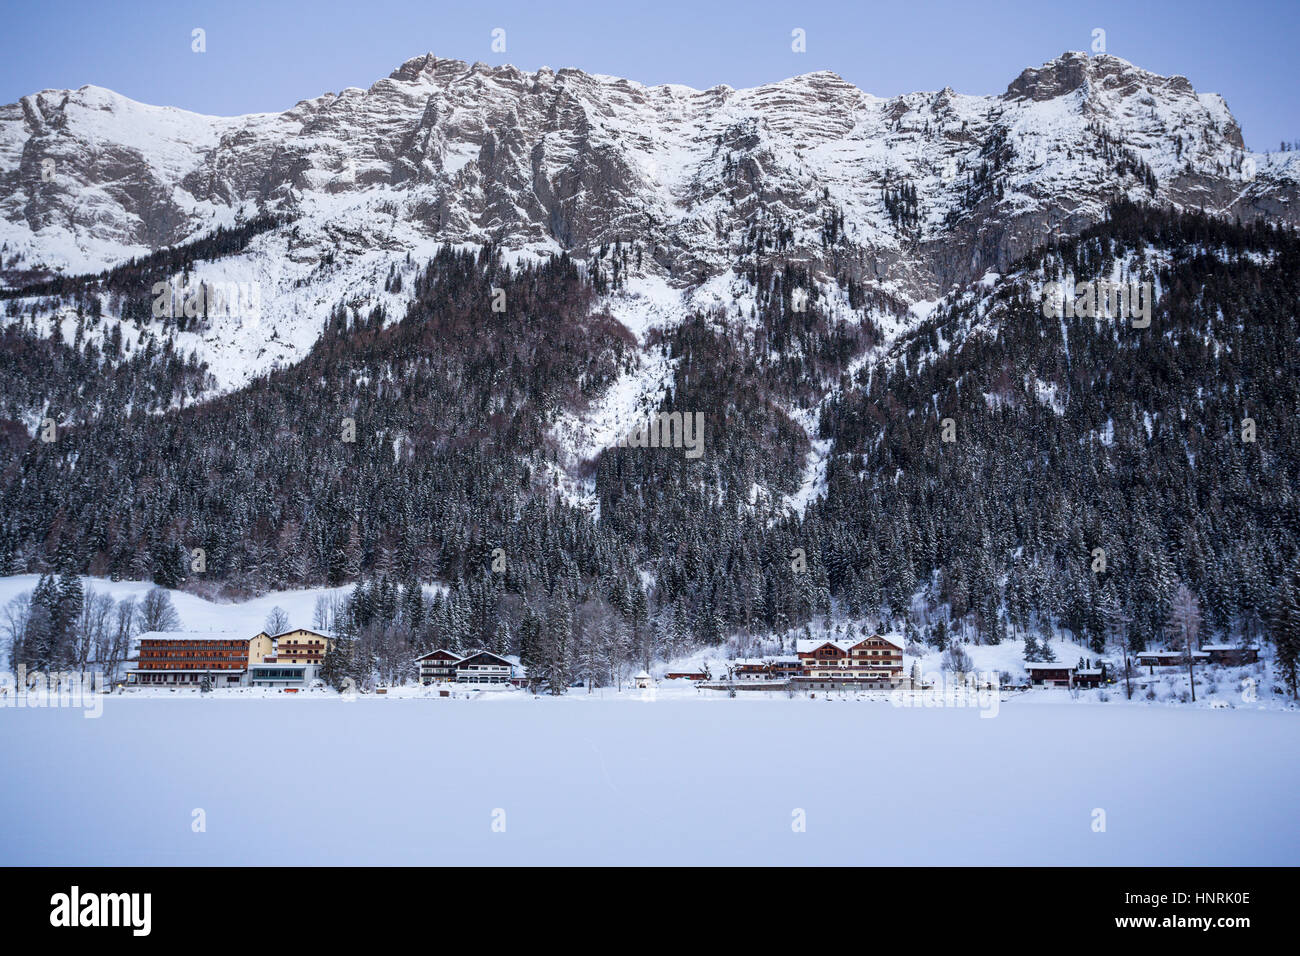 Village in Winter, Hintersee with Mountain in the background, Berchtesgaden, Bavaria, Germany Stock Photo